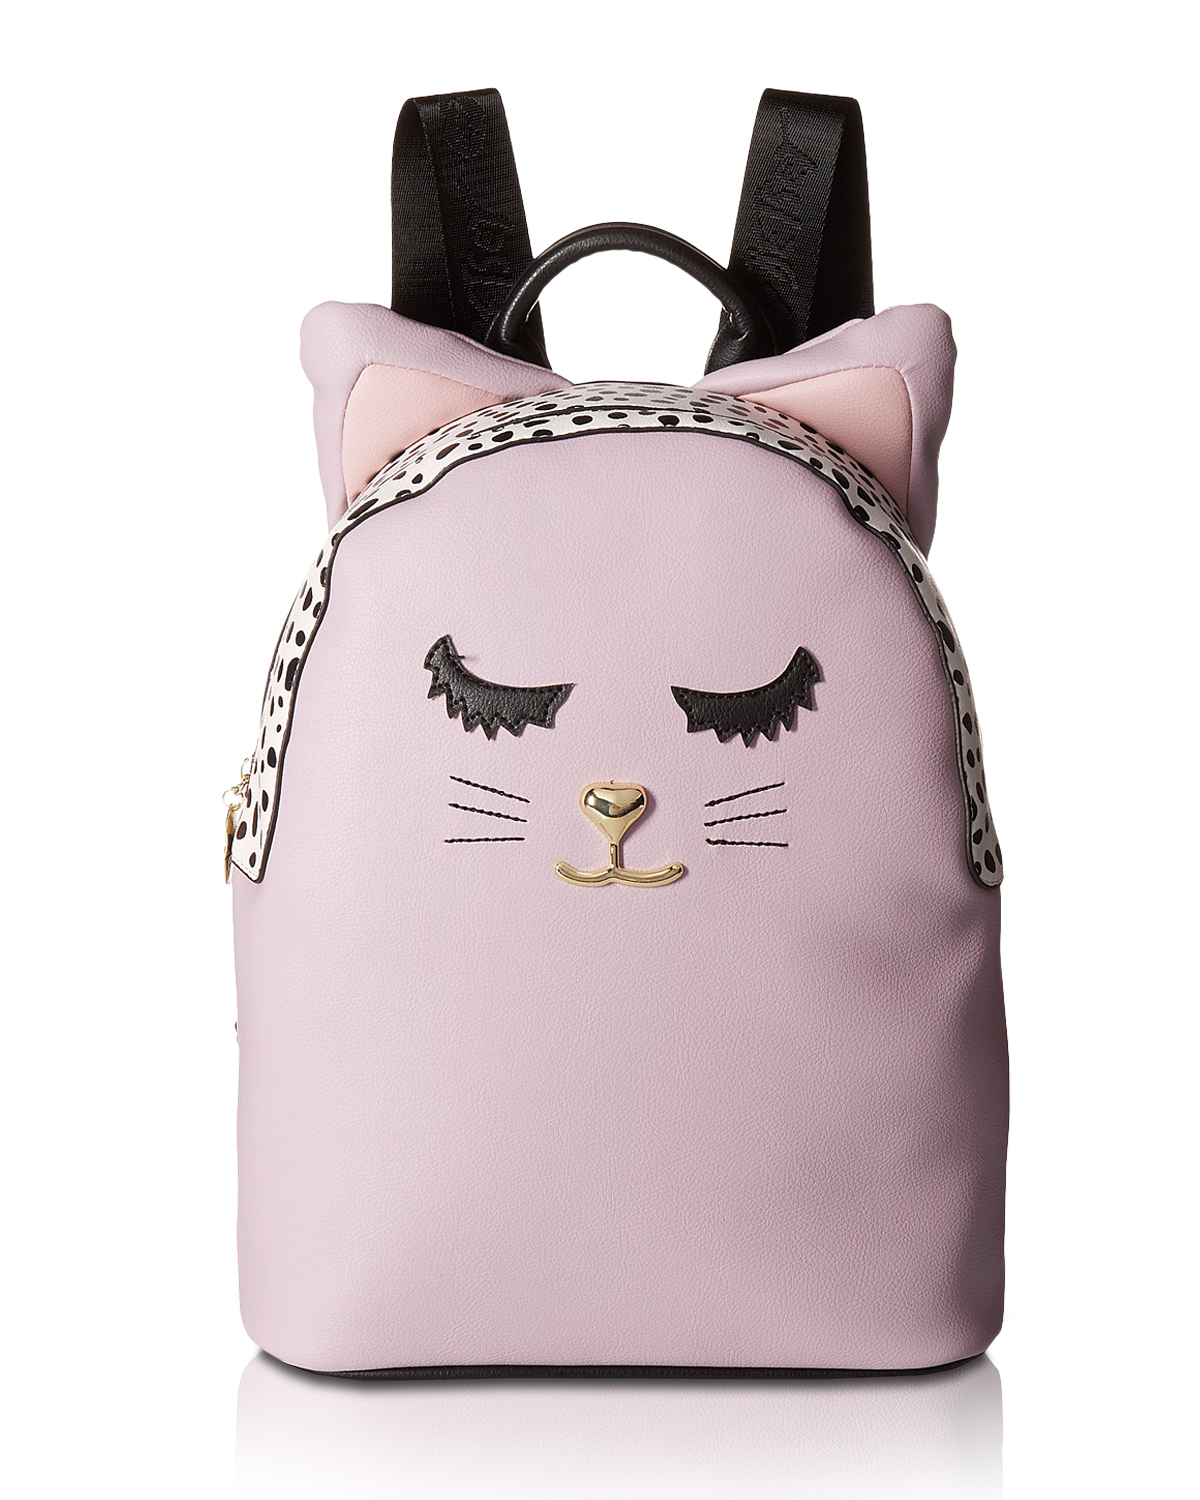 Luv Betsey By Betsey Johnson Milla Cat Face Backpack - Mauve LBMILLA-MV